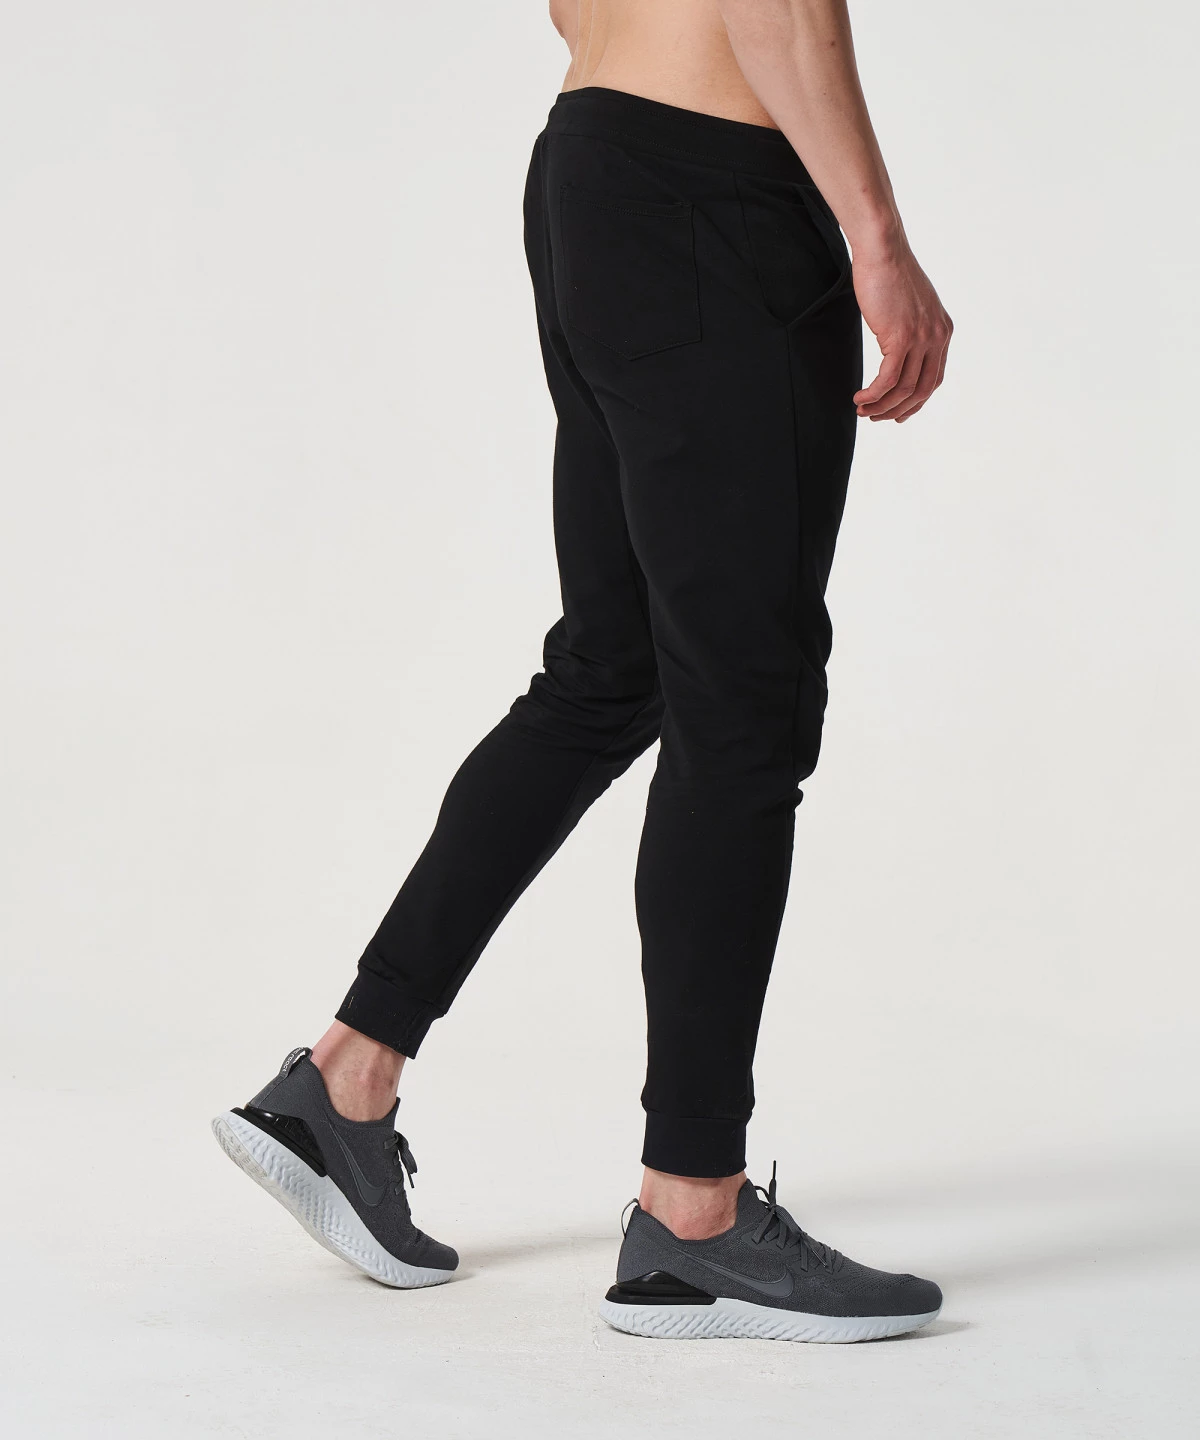 Men S Narrow Fit Joggers at Rs 275/piece, Joggers for Men in Kashipur